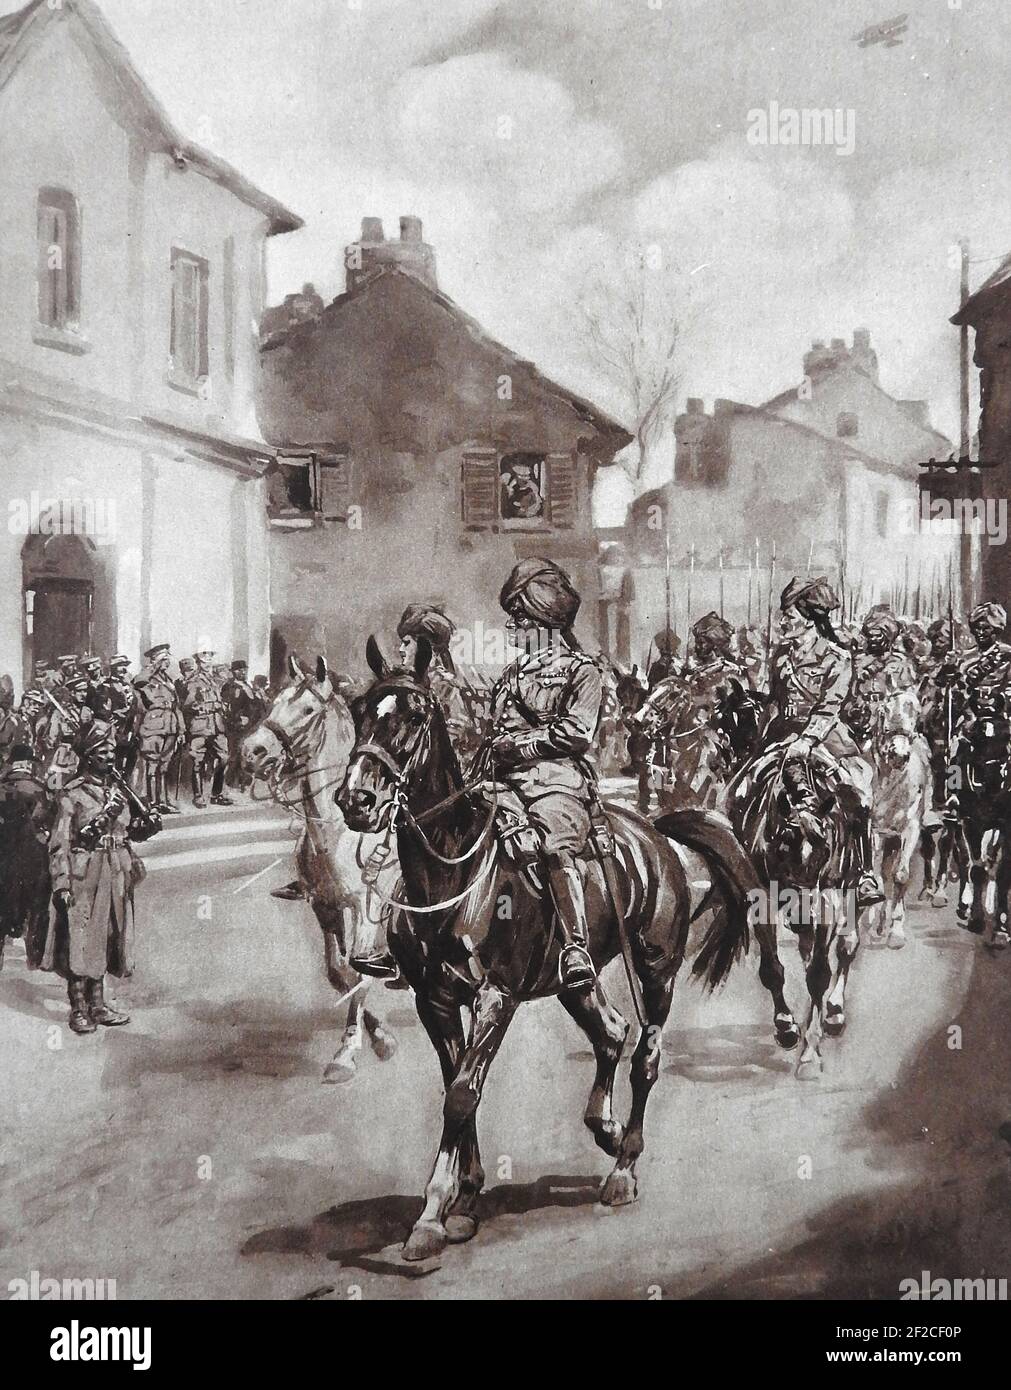 WWI - General Pertab Singh  aka  Pratap Singh) eadhing the Jodhpur Lancers through a french village    ---  Lieutenant-General Sir Pratap Singh,  ( 1845 –  1922)  was a career British Indian Army officer as well as being the Maharaja of the princely state of Idar (Gujarat) . He was close to Queen Victoria and the British Royal family and served as  aide-de-camp to Edward VII . Stock Photo